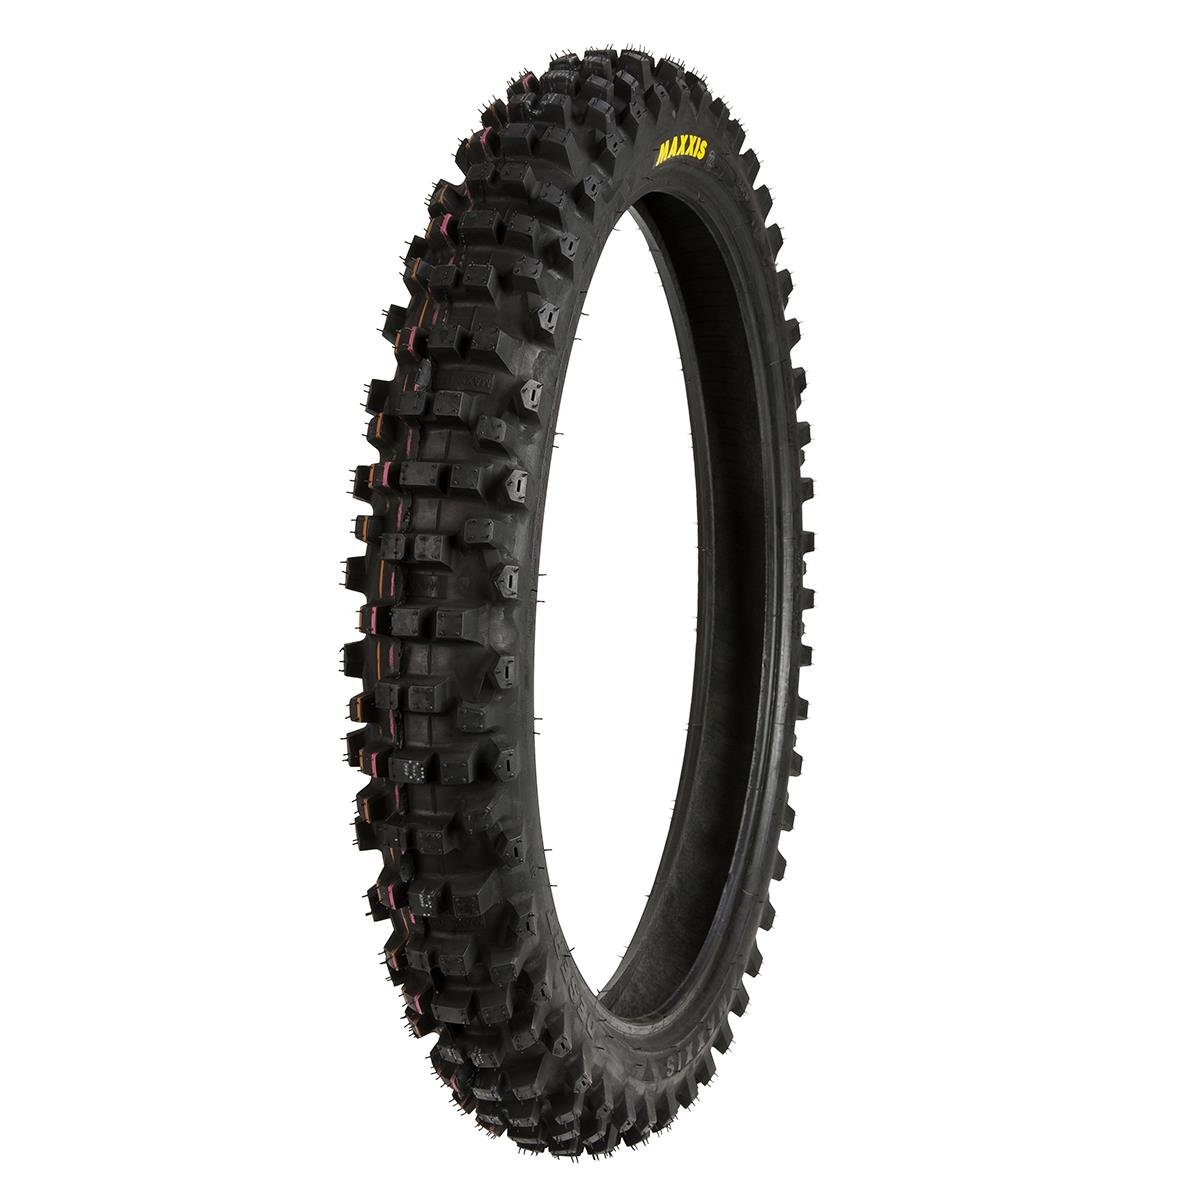 Maxxis Front Tire Maxxcross SM M7307 80/100-21, Sand